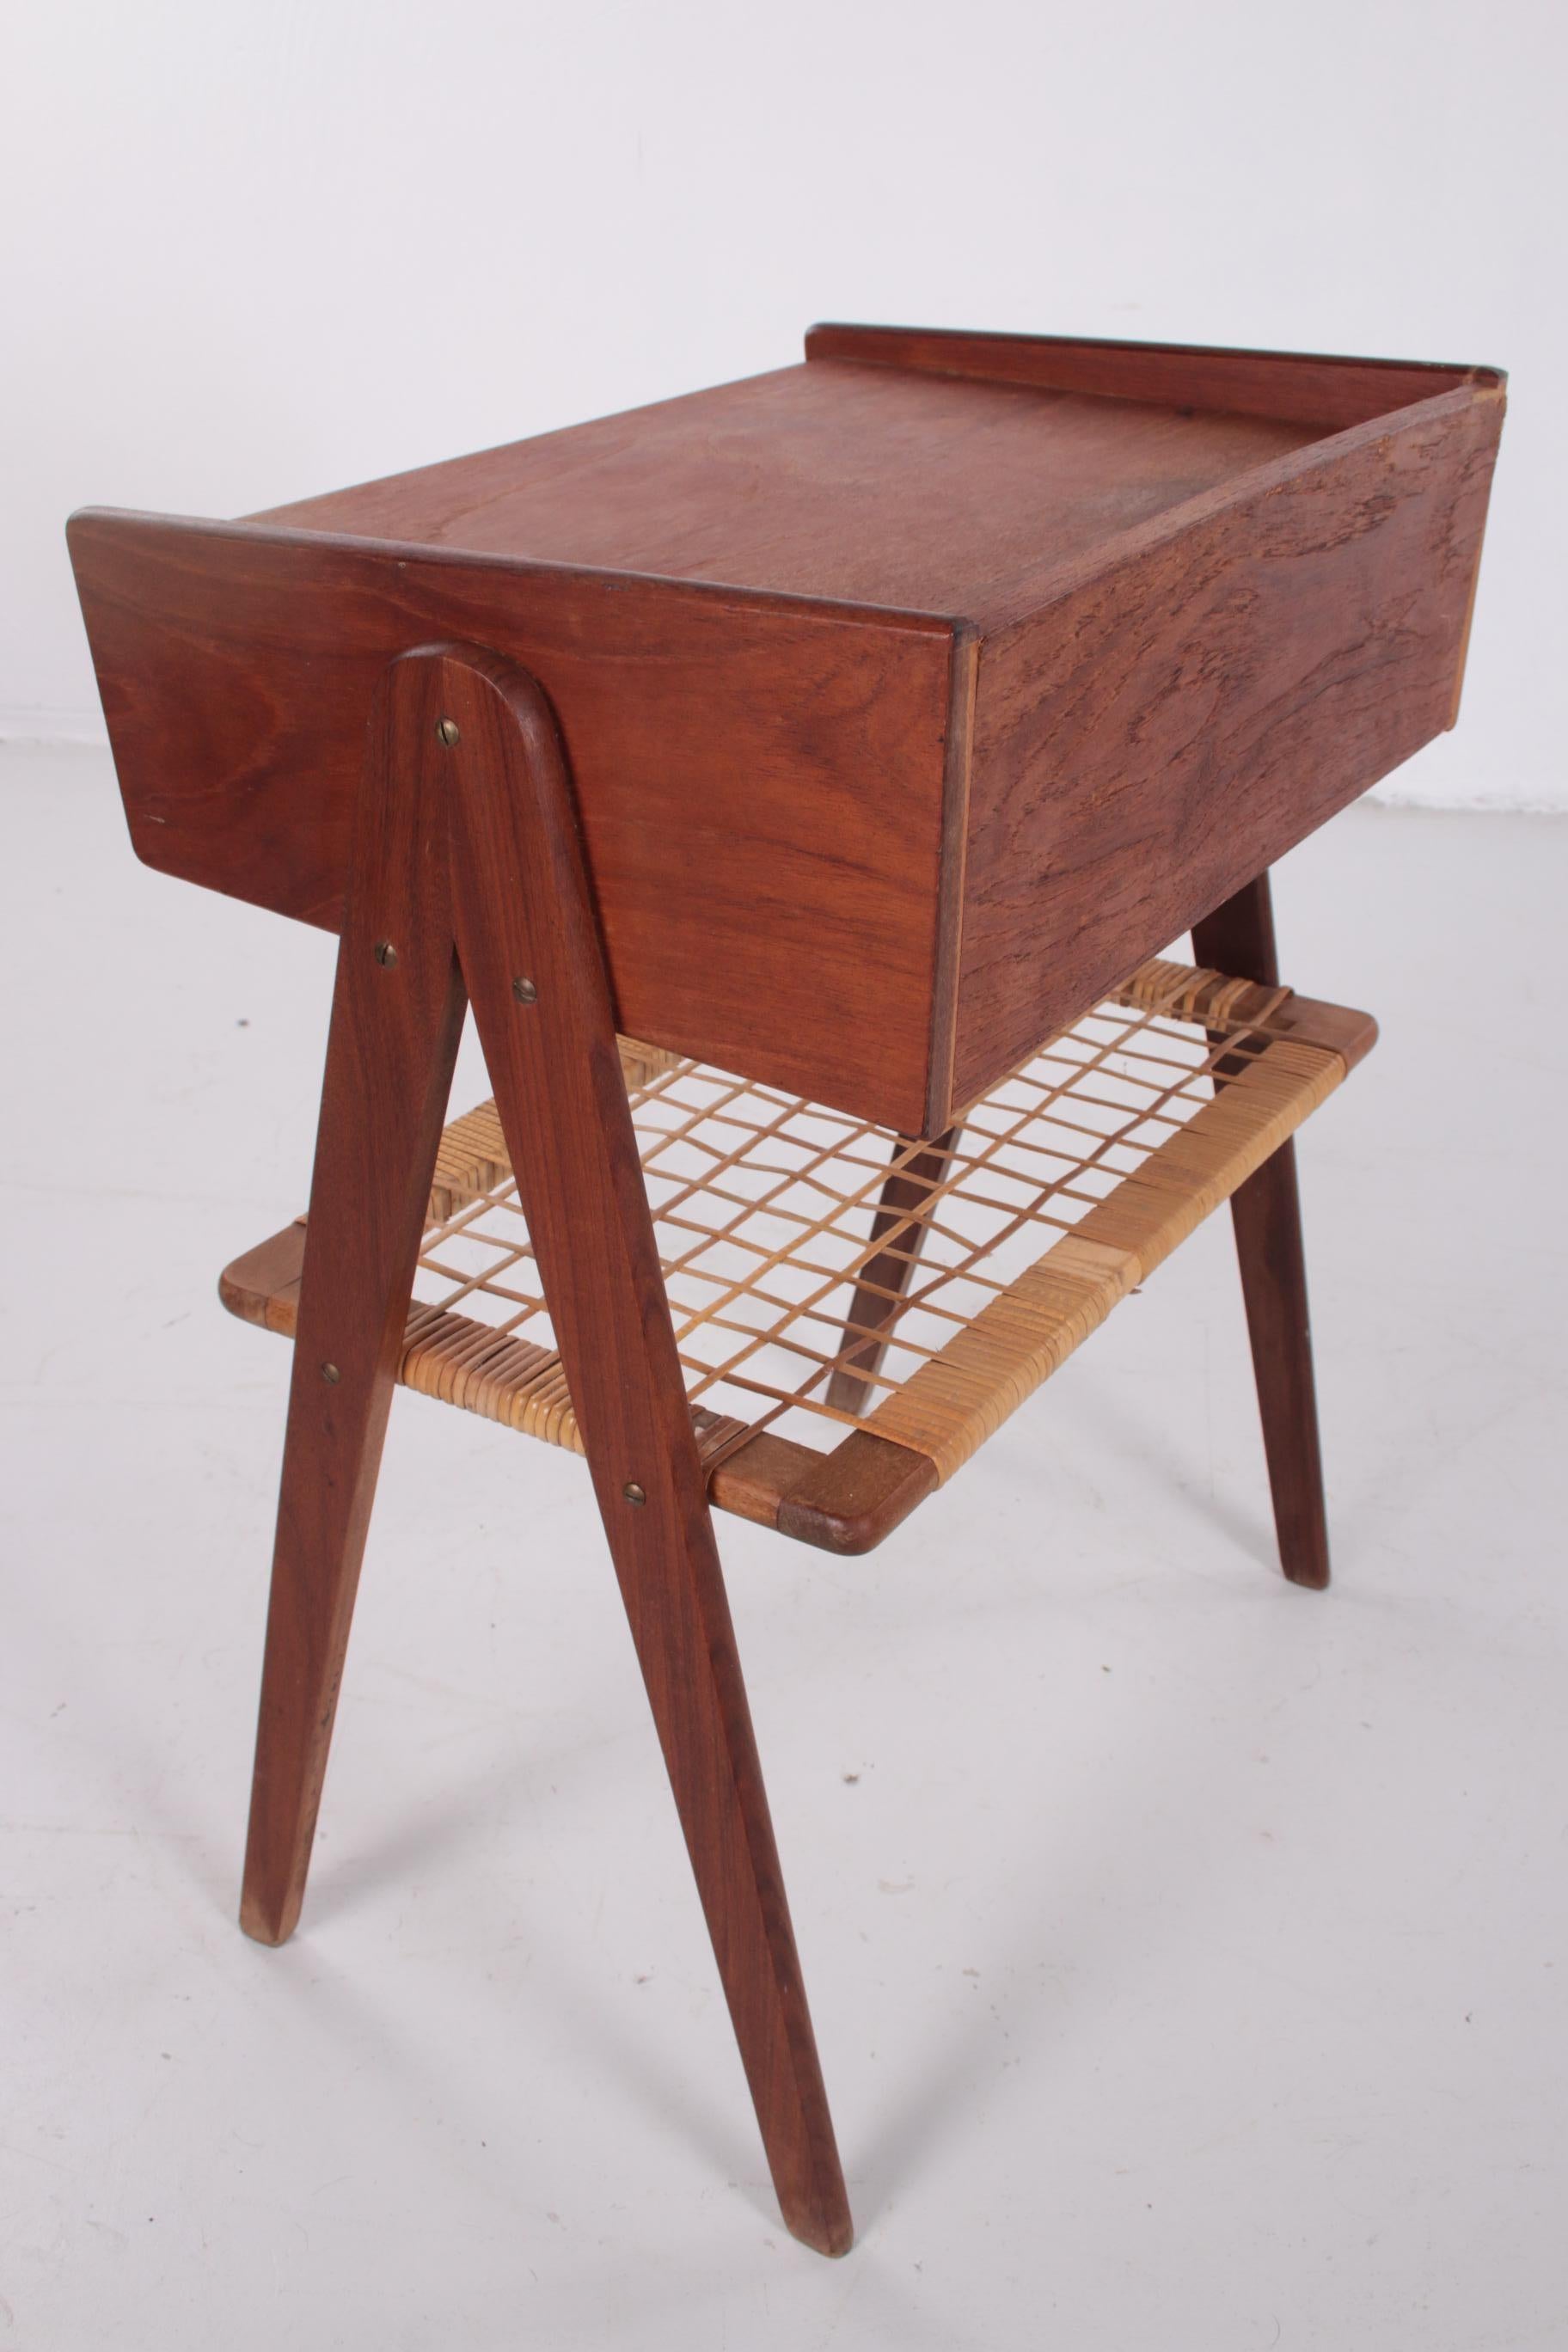 Danish bedside table with rattan rack and drawer


Beautifully shaped bedside table with a rattan shelf and a drawer. The beautiful V-shape legs certainly give you a very good quality.

This cabinet is made of teak wood.